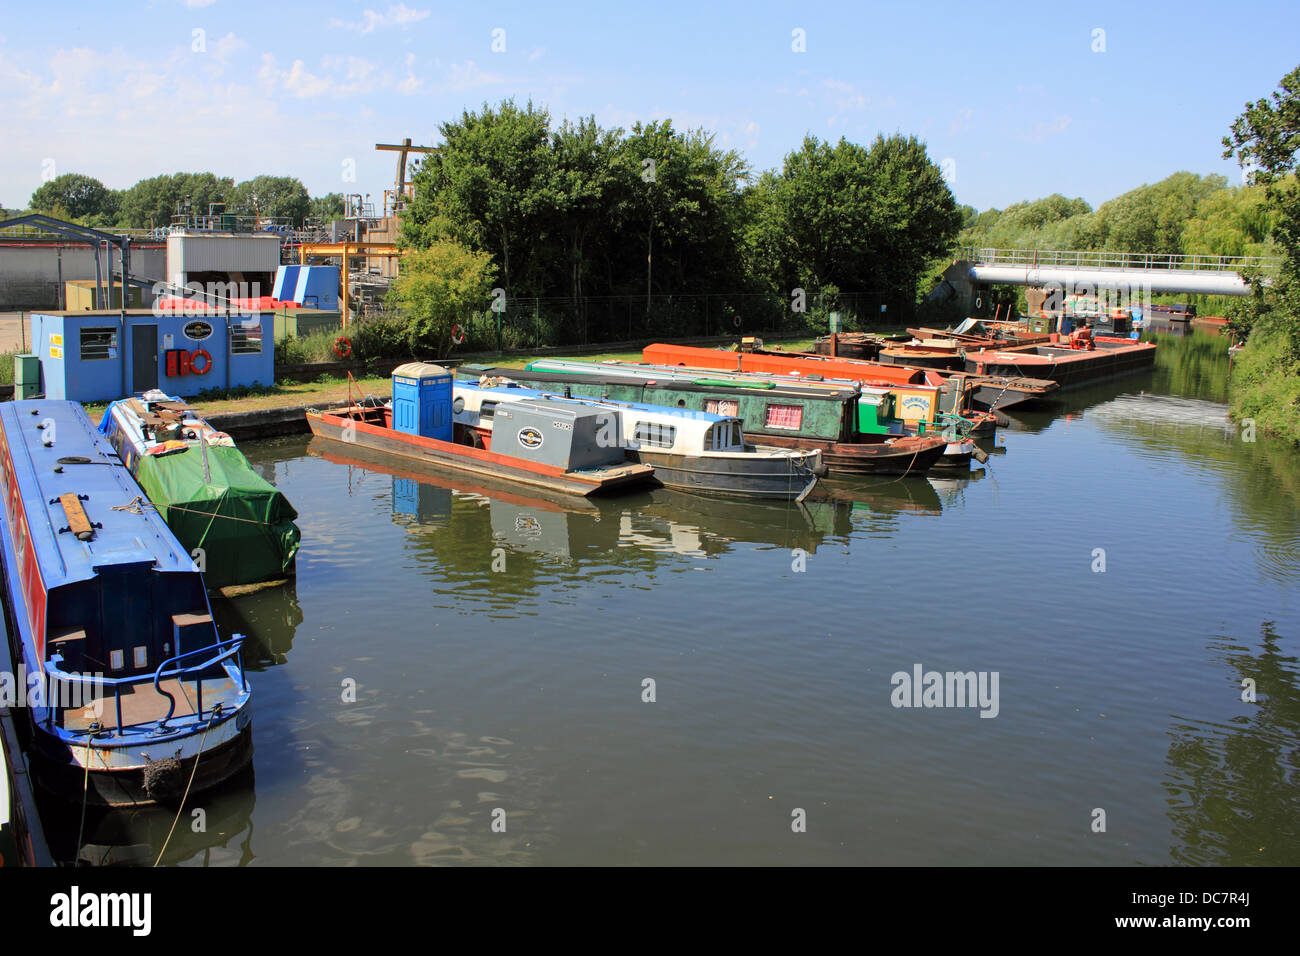 The Grand Union Canal at near Maple Cross, North West London, England, UK. Stock Photo